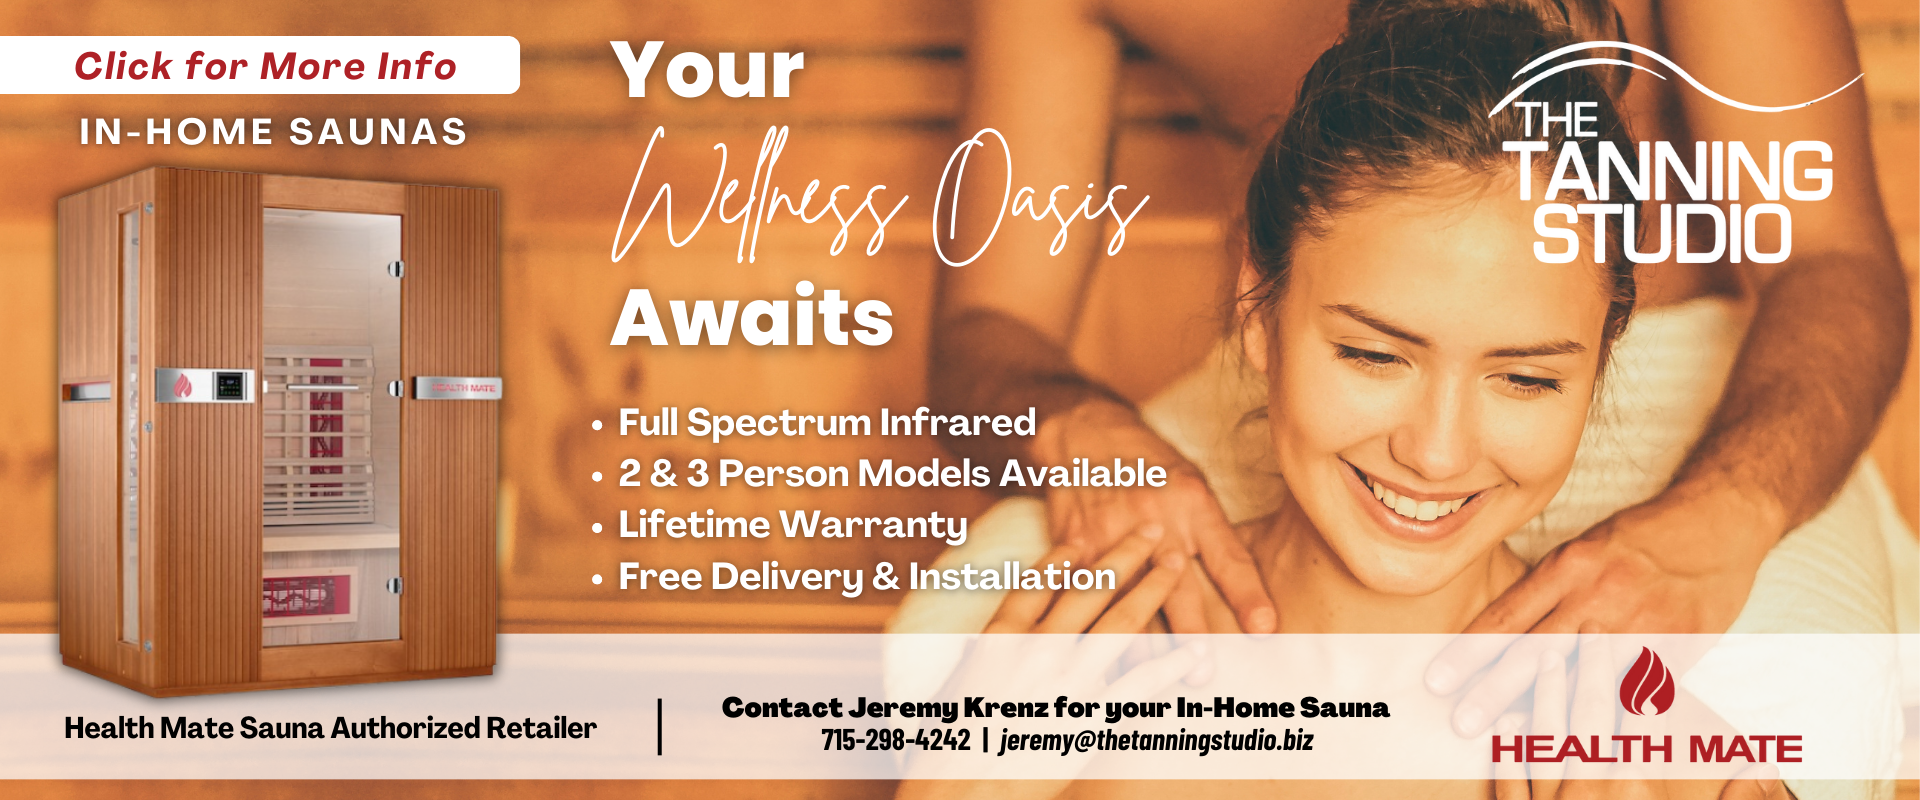 Your Wellness Oasis Awaits. In Home Saunas. Full spectrum infrared. 2 & 3 person models available. Lifetime Warranty. Free Delivery & Installation. 